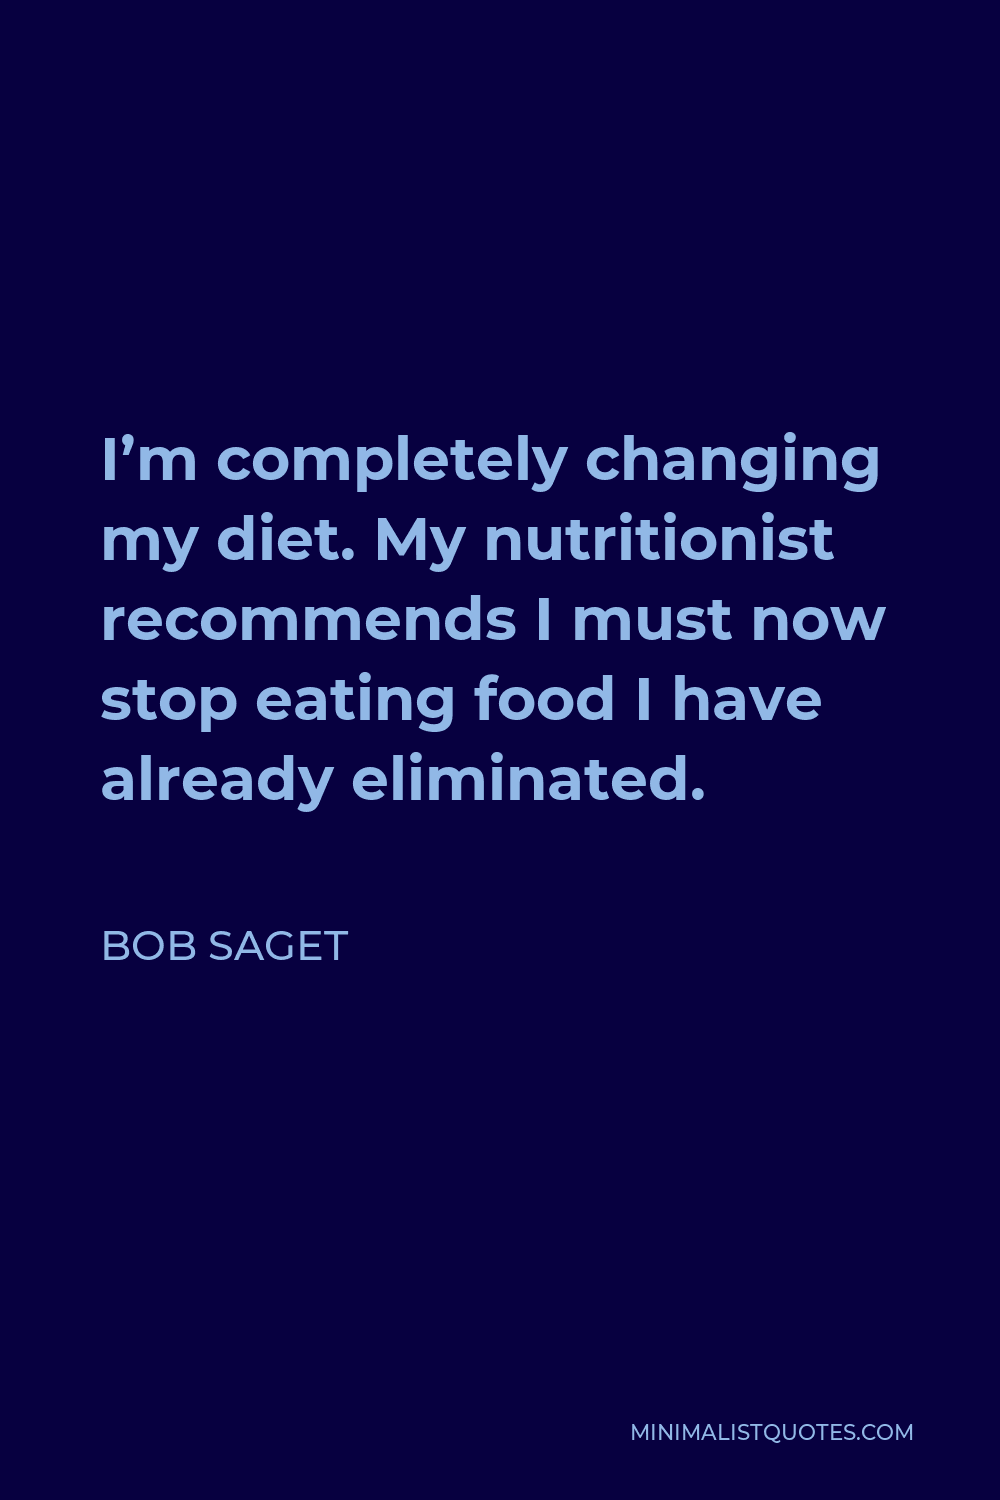 Bob Saget Quote - I’m completely changing my diet. My nutritionist recommends I must now stop eating food I have already eliminated.